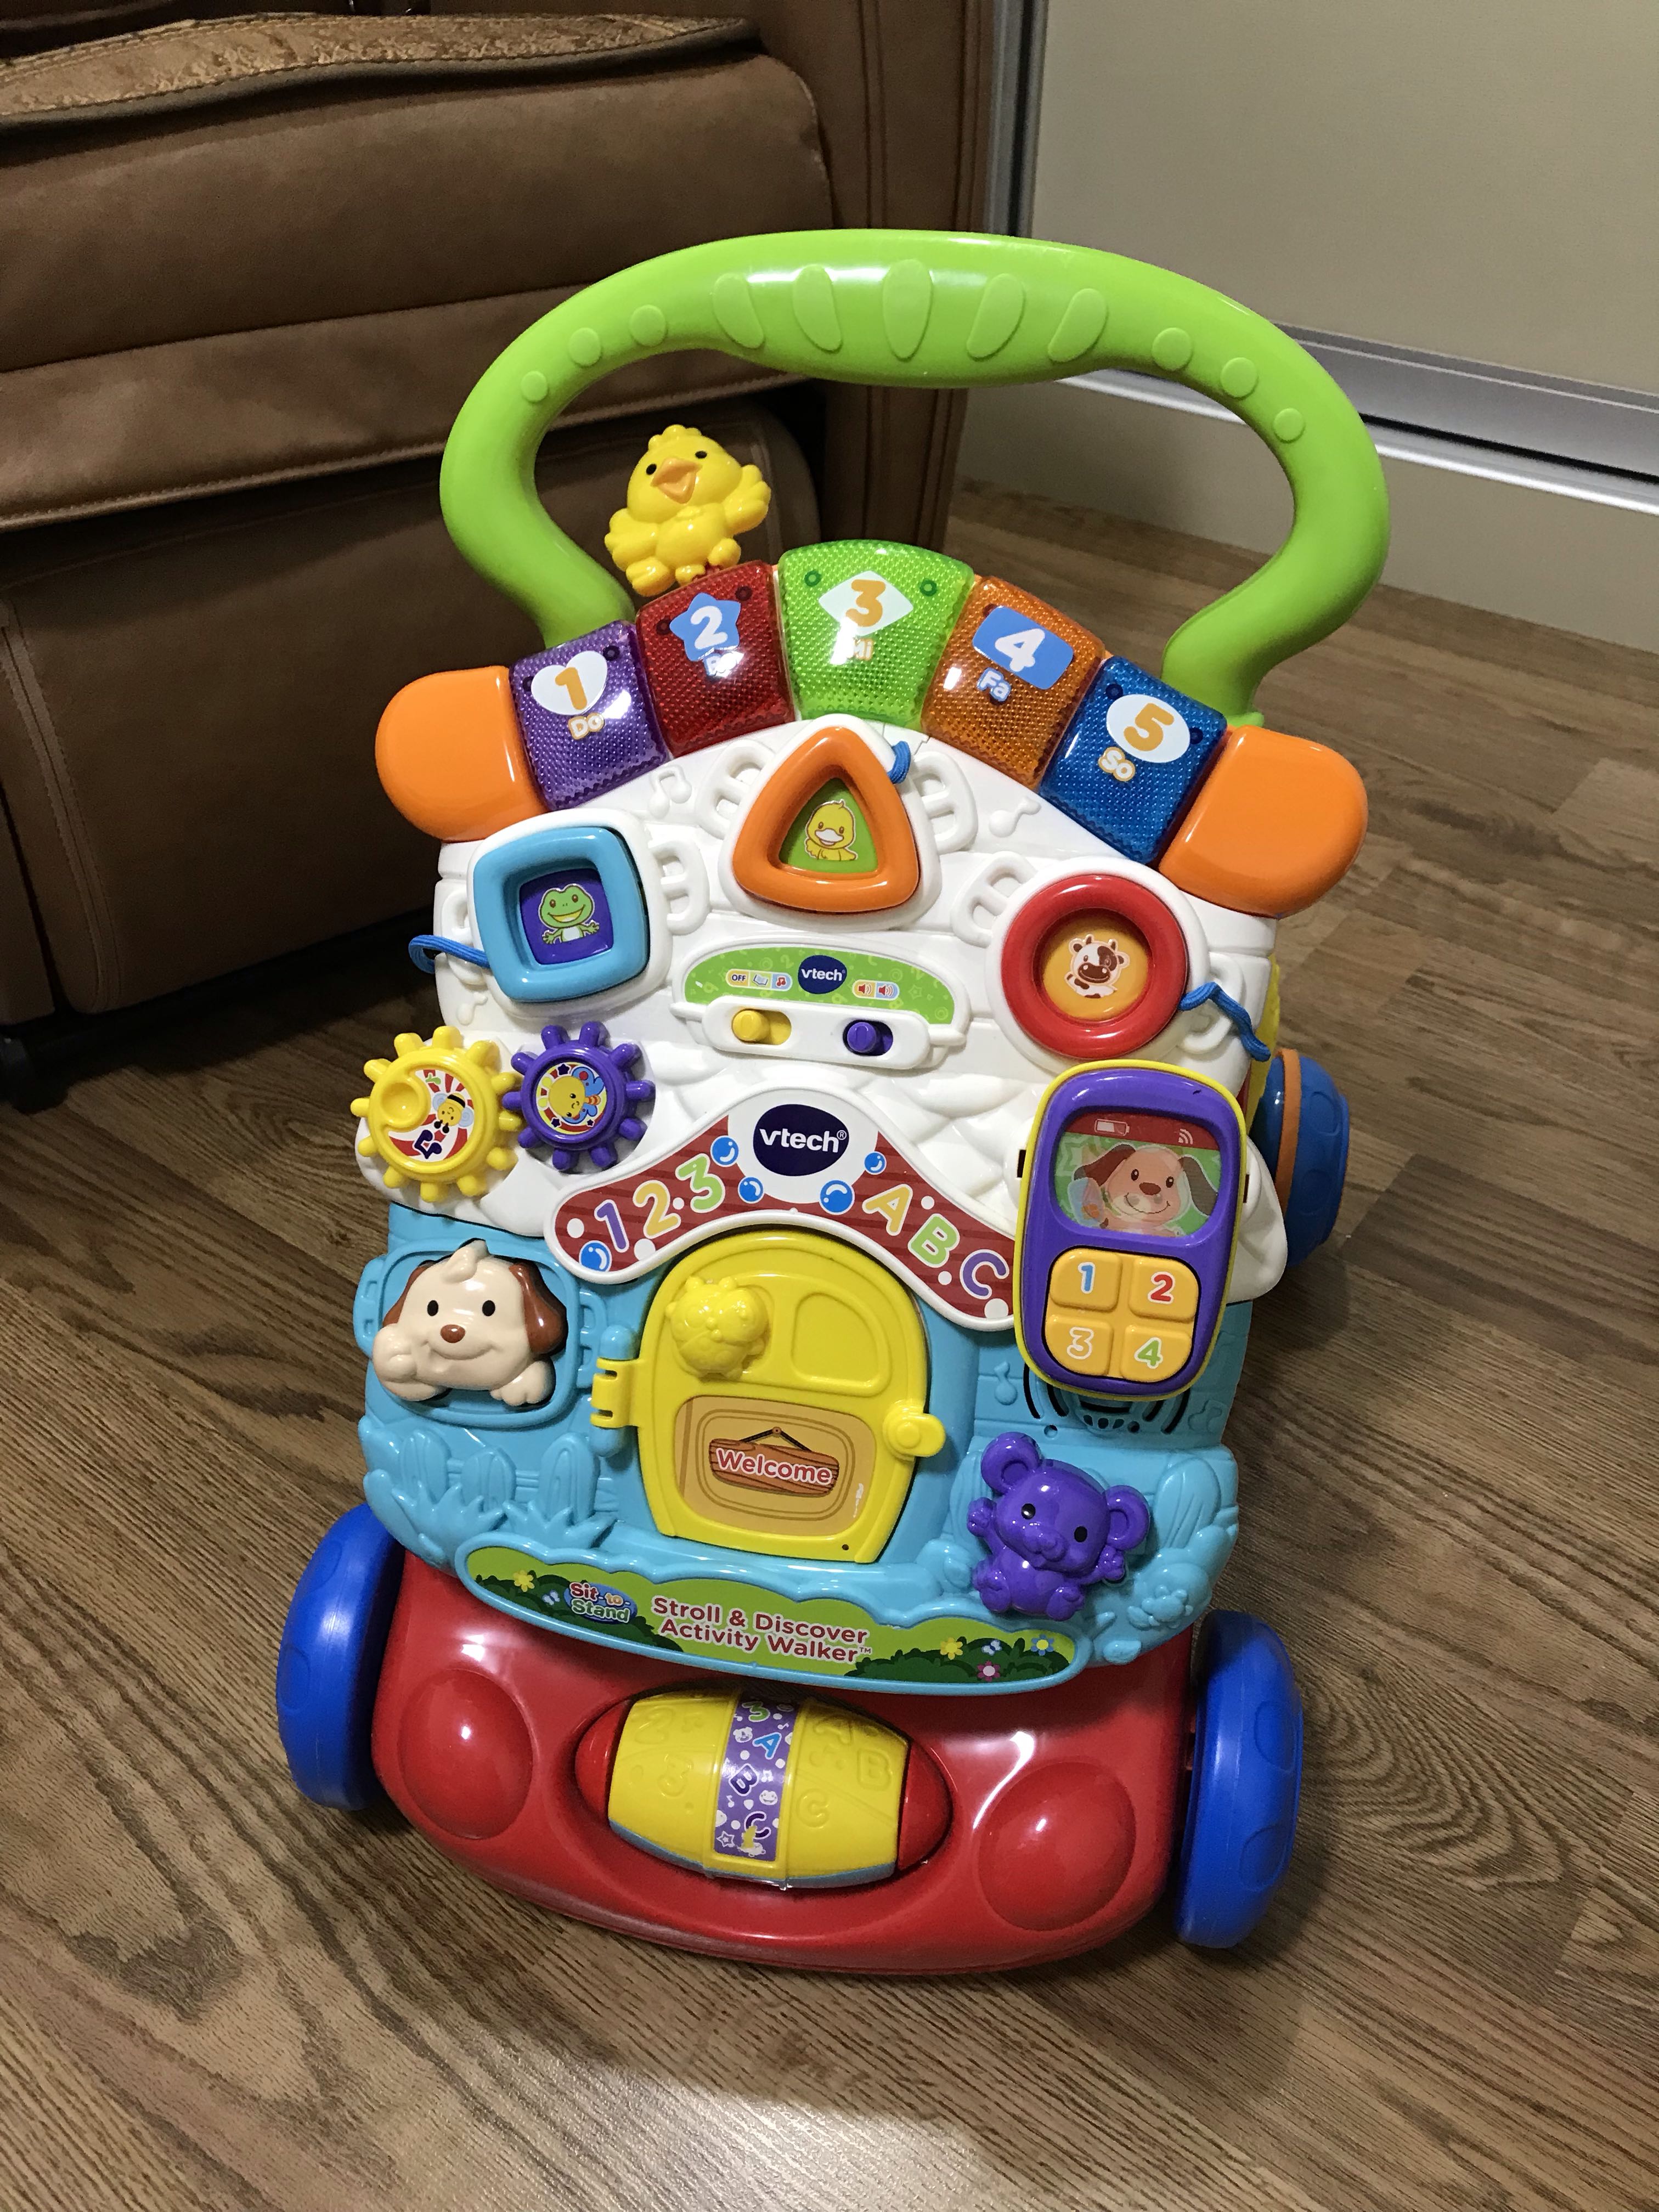 vtech stroll and discover walker